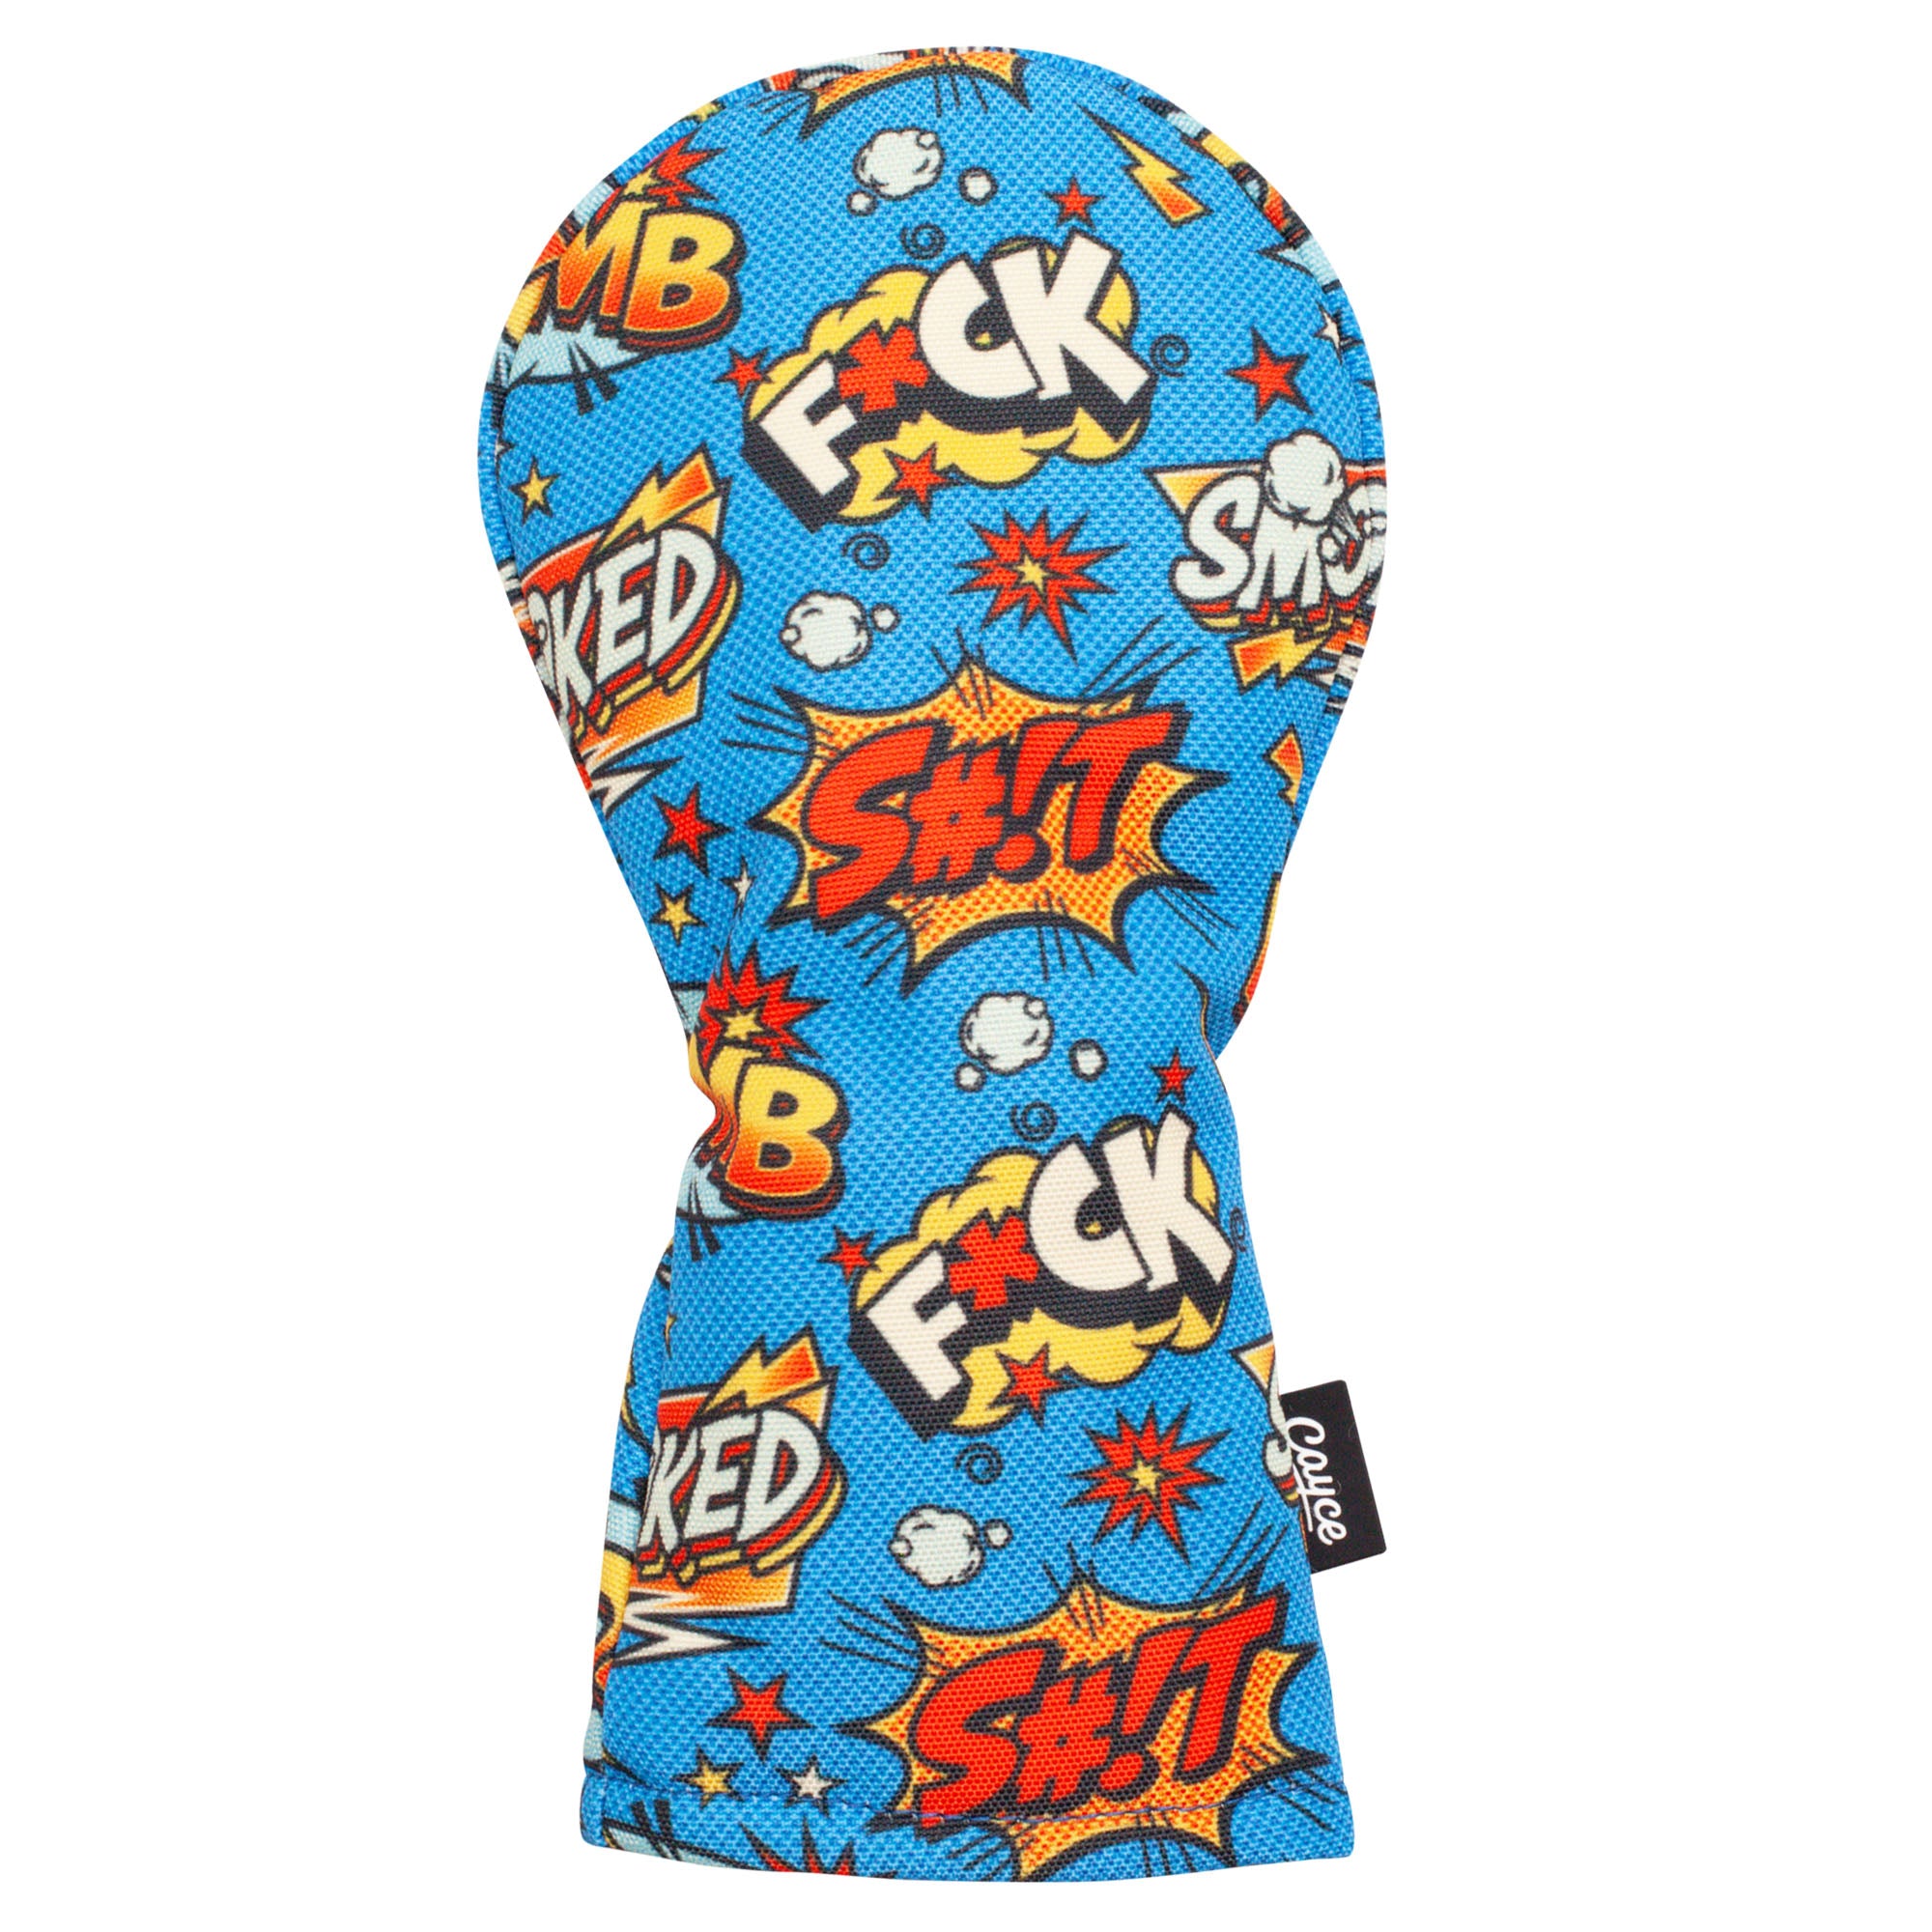 hilarious, vibrant, blue hybrid headcover for golf with a pop art inspired design featuring common words golfer say